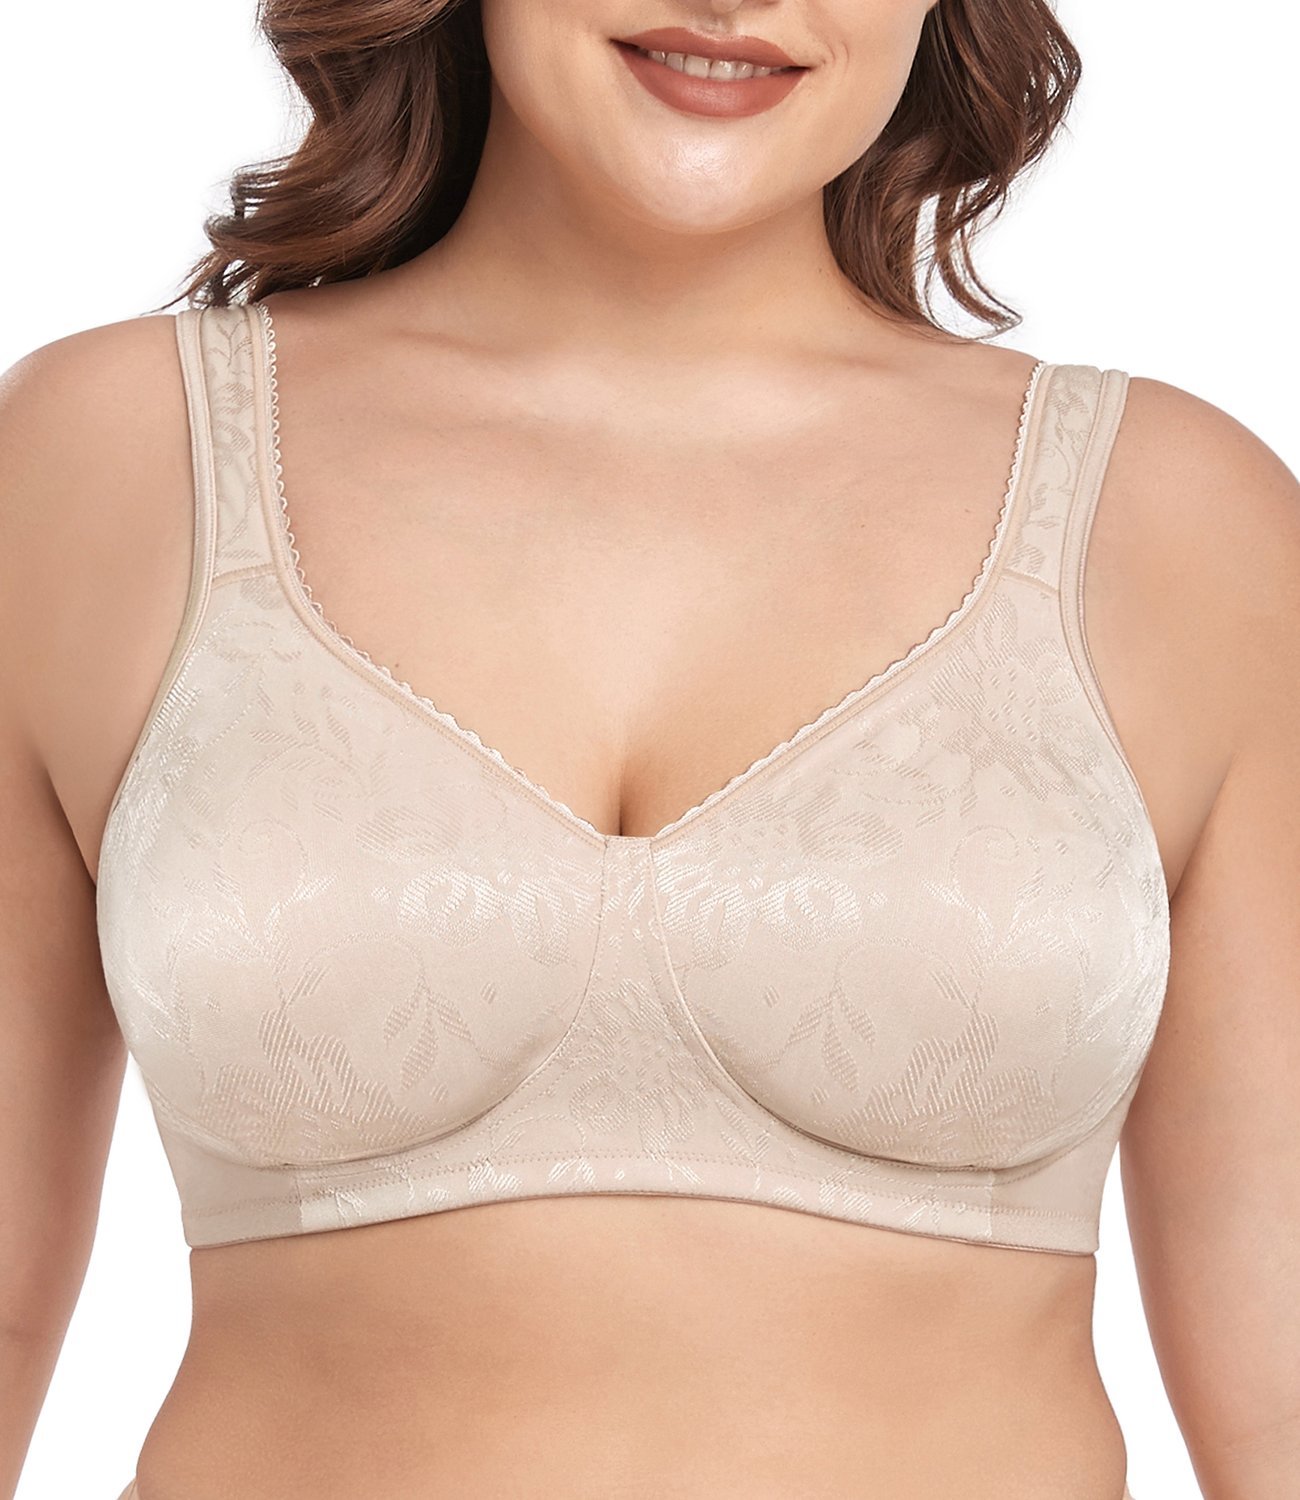 Women's Lace Bra Minimizer Bras For Women Full Cup Non-Padded